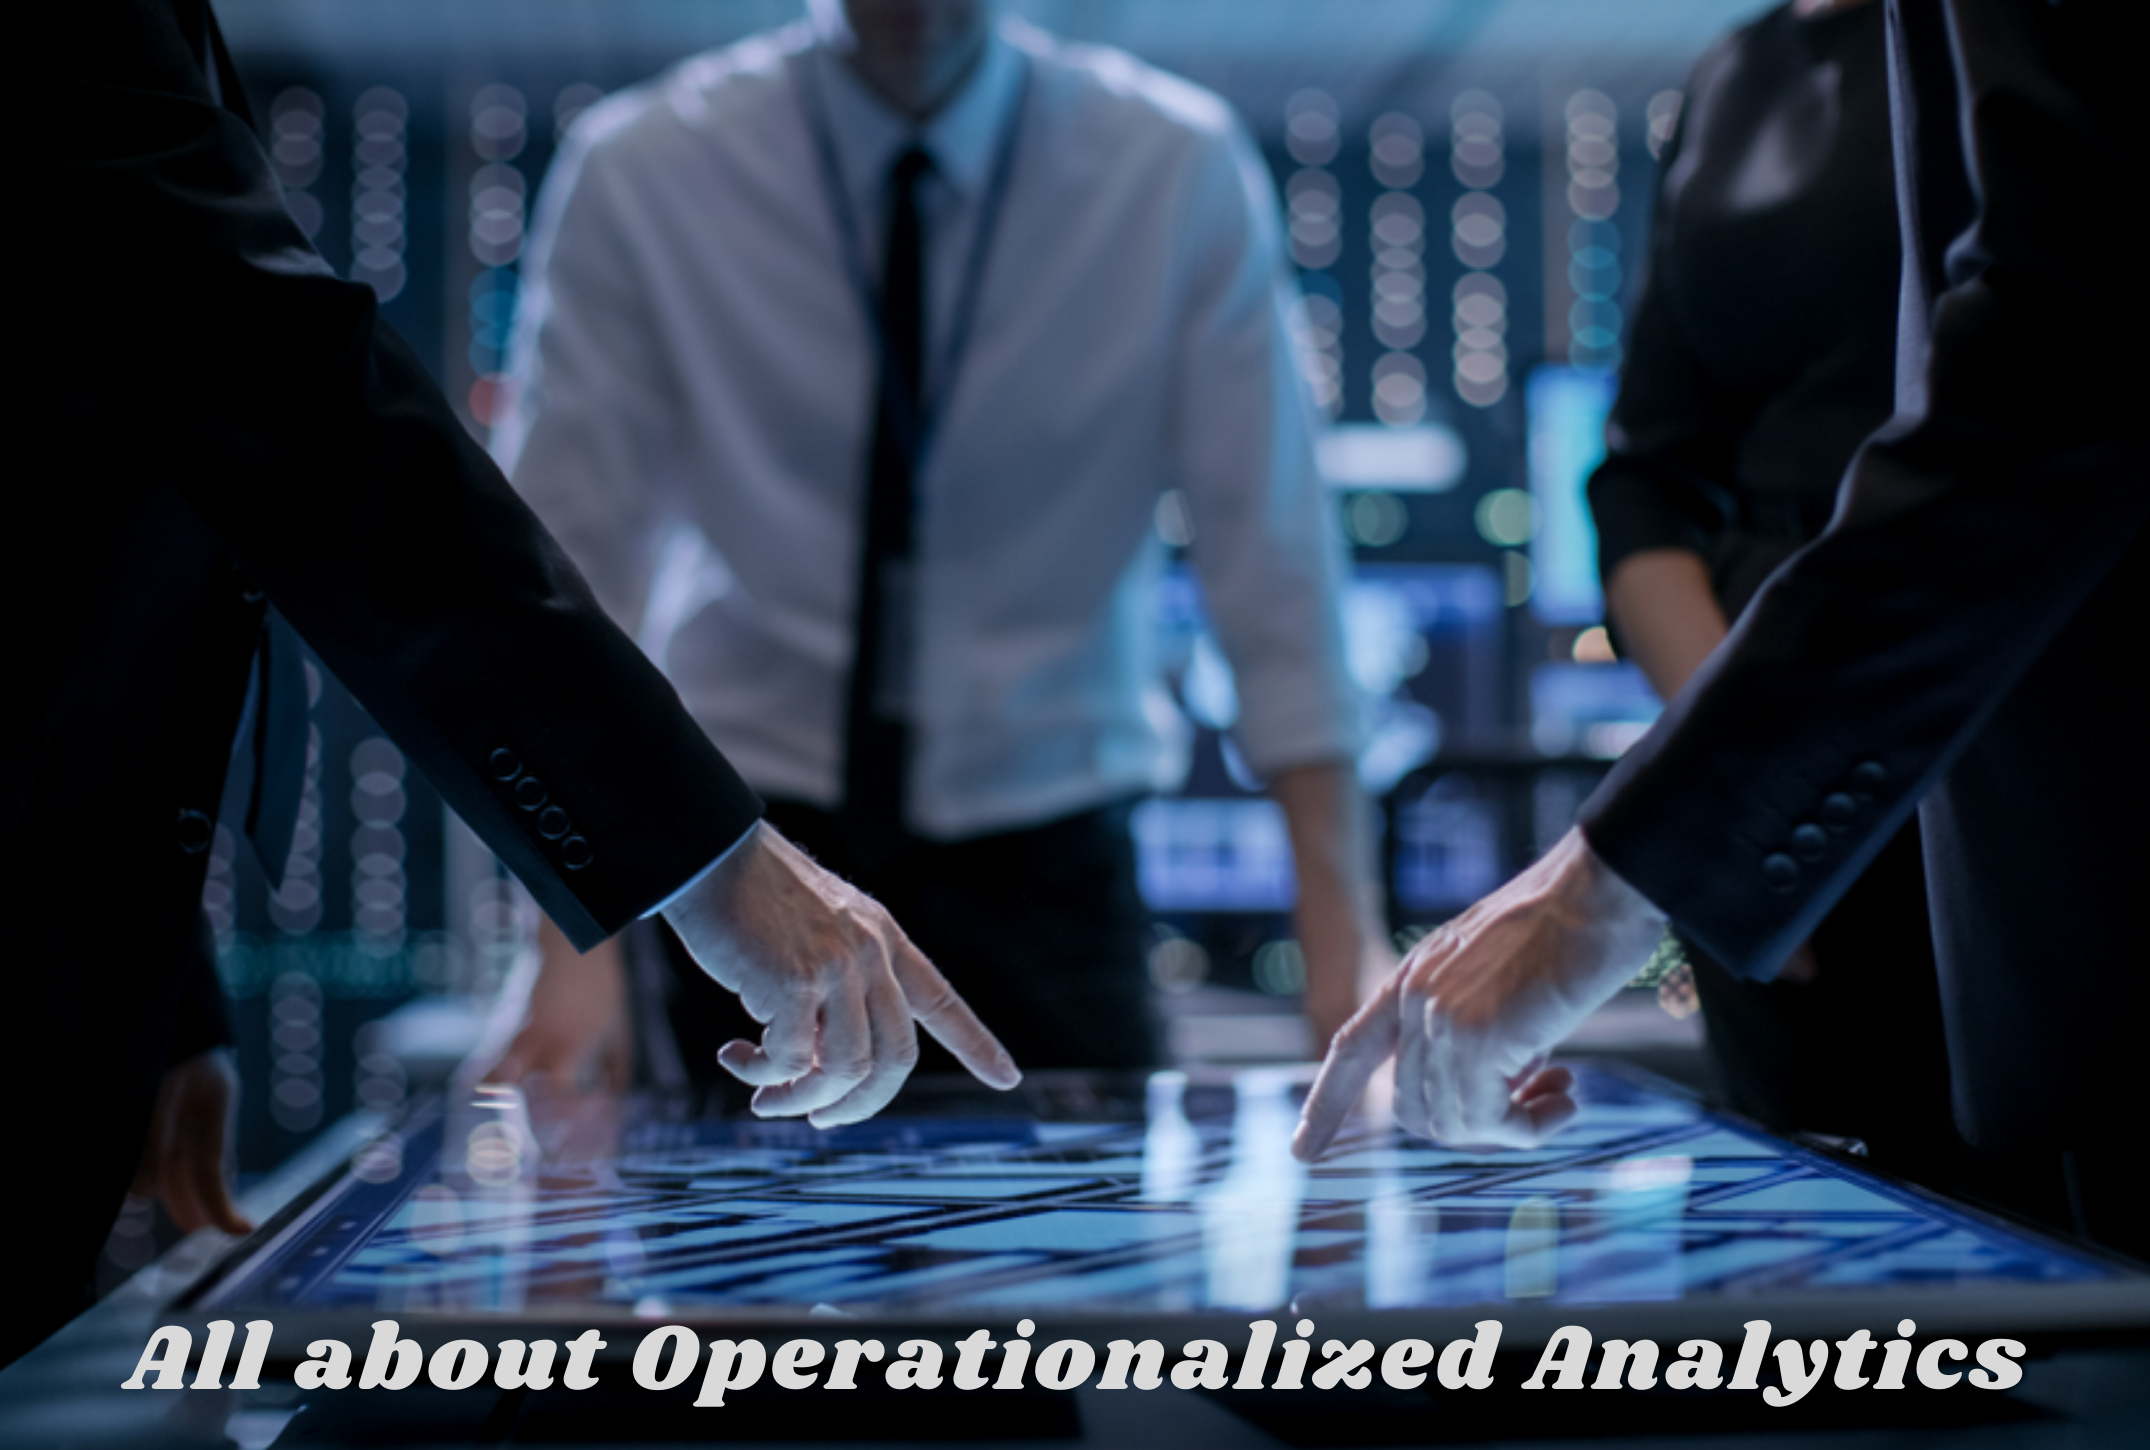 All about Operationalized Analytics